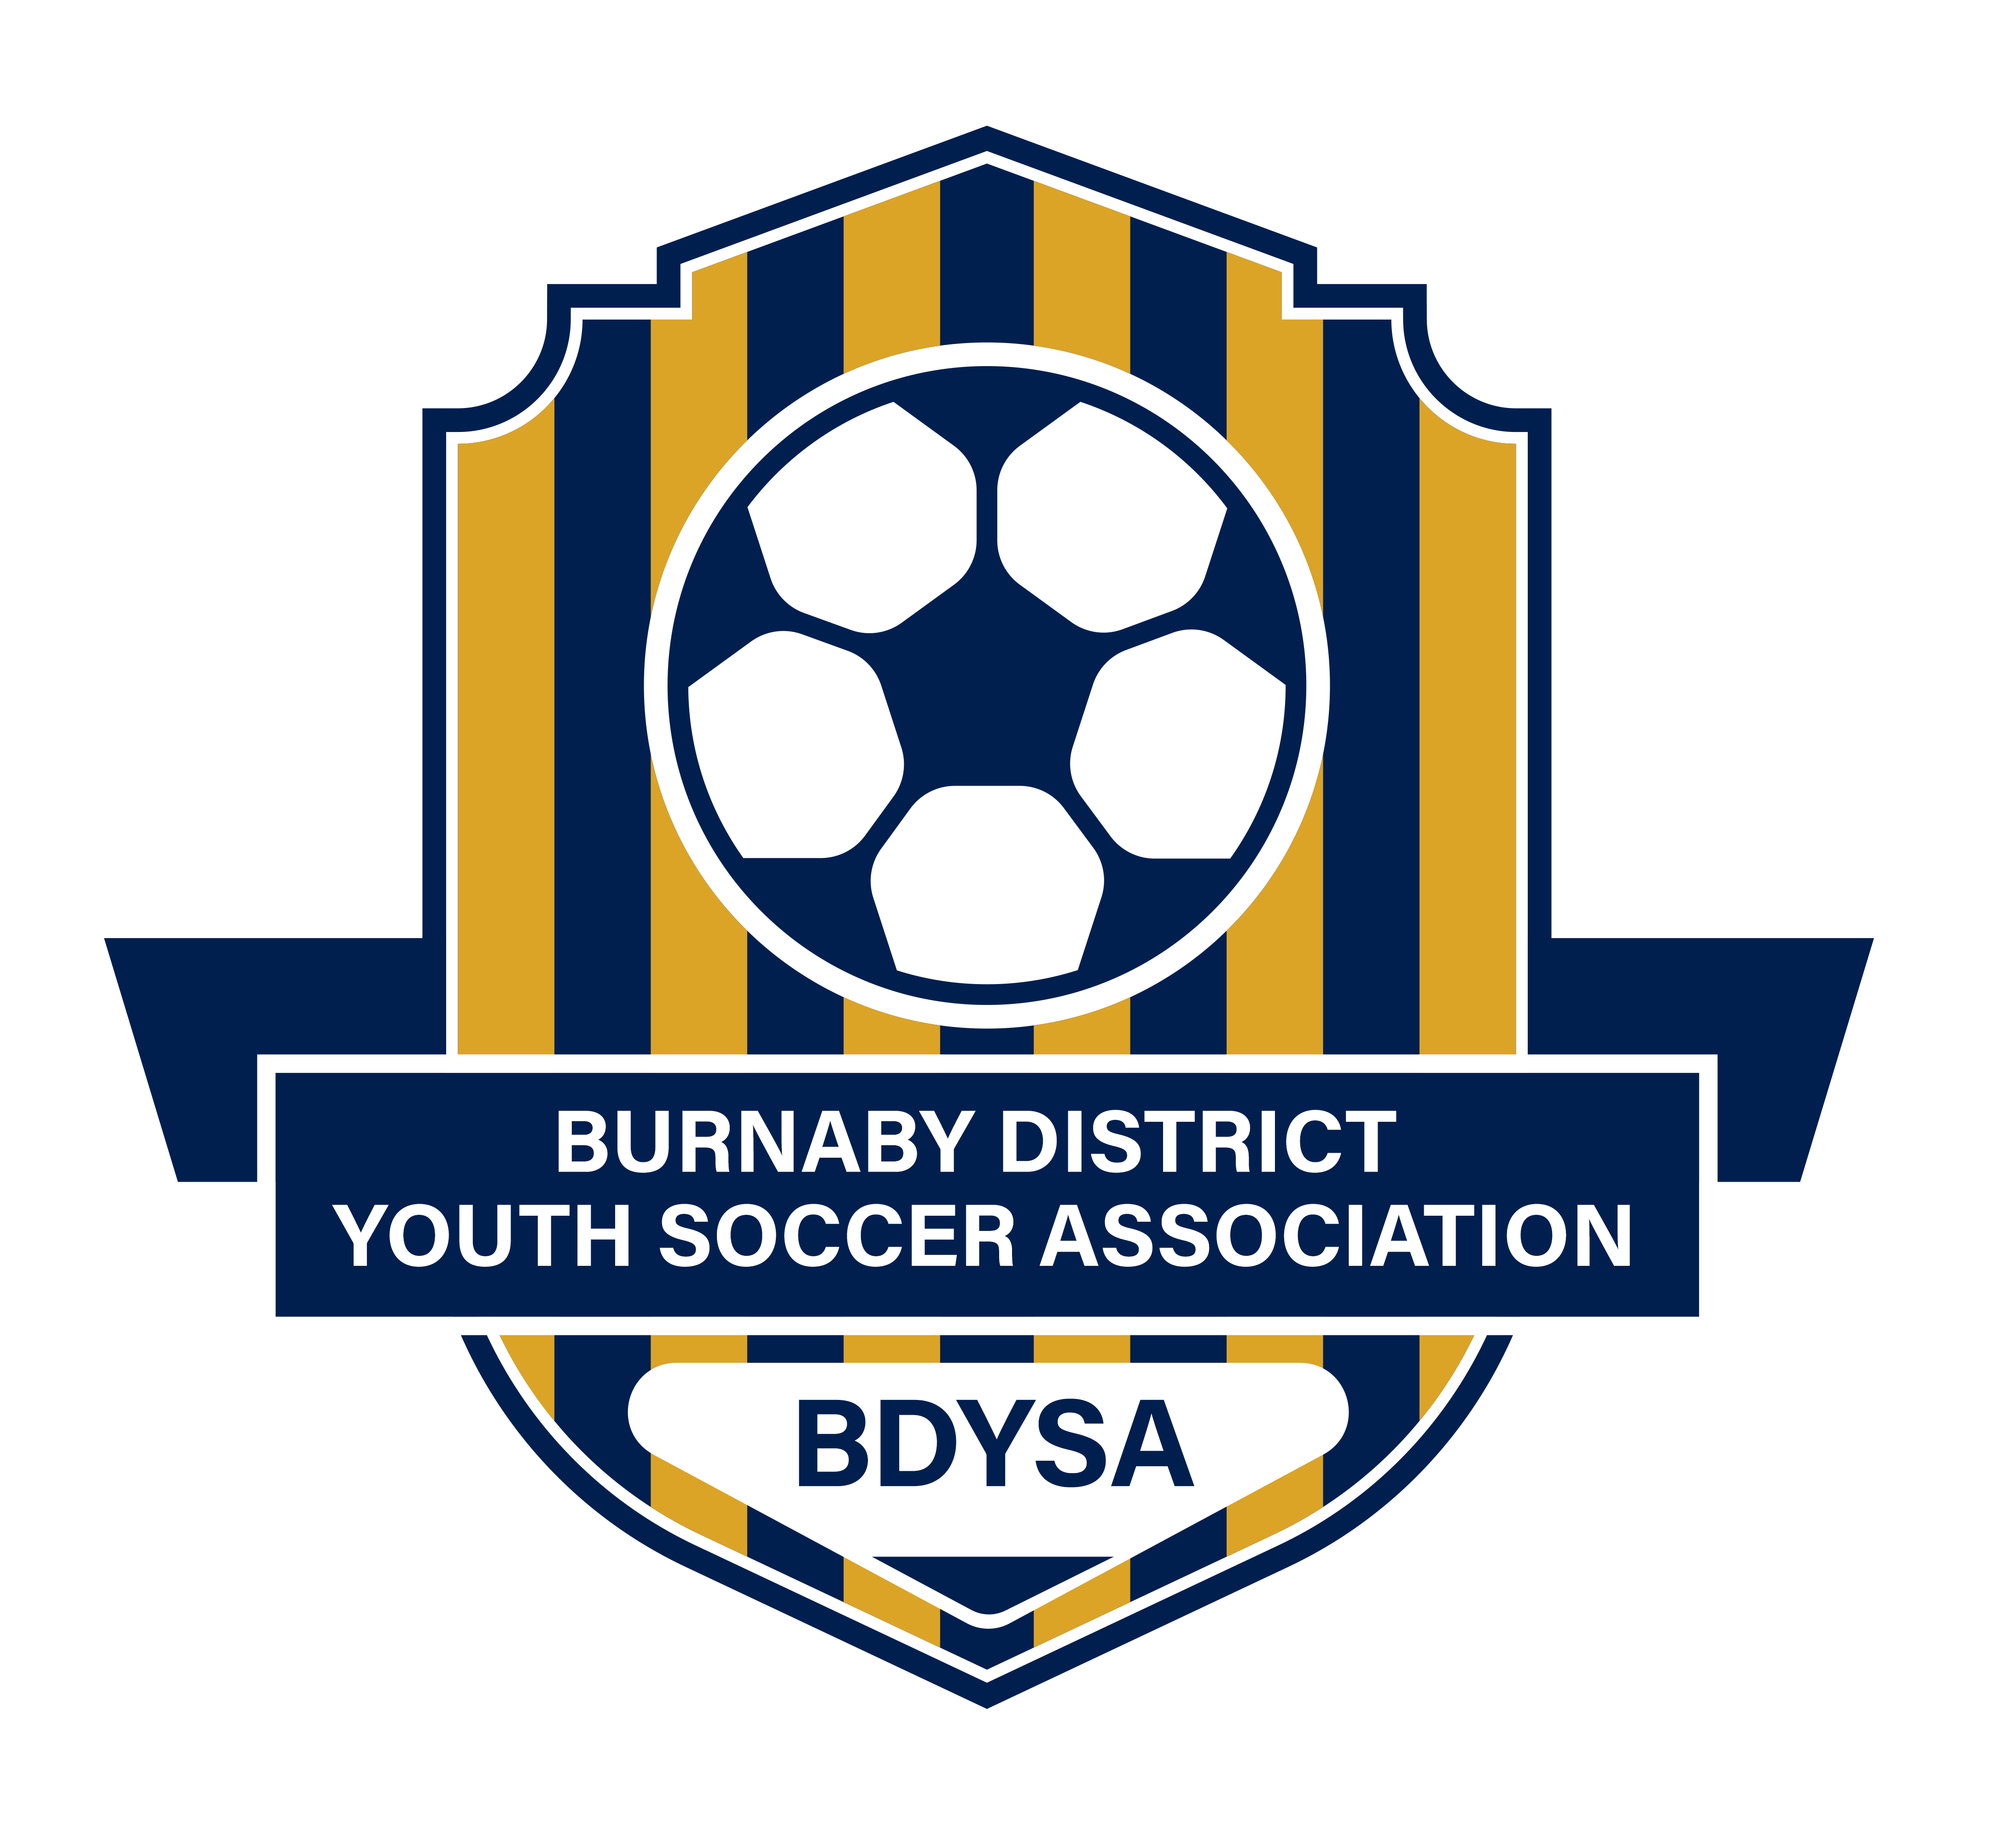 BURNABY DISTRICT YOUTH SOCCER ASSOCIATION